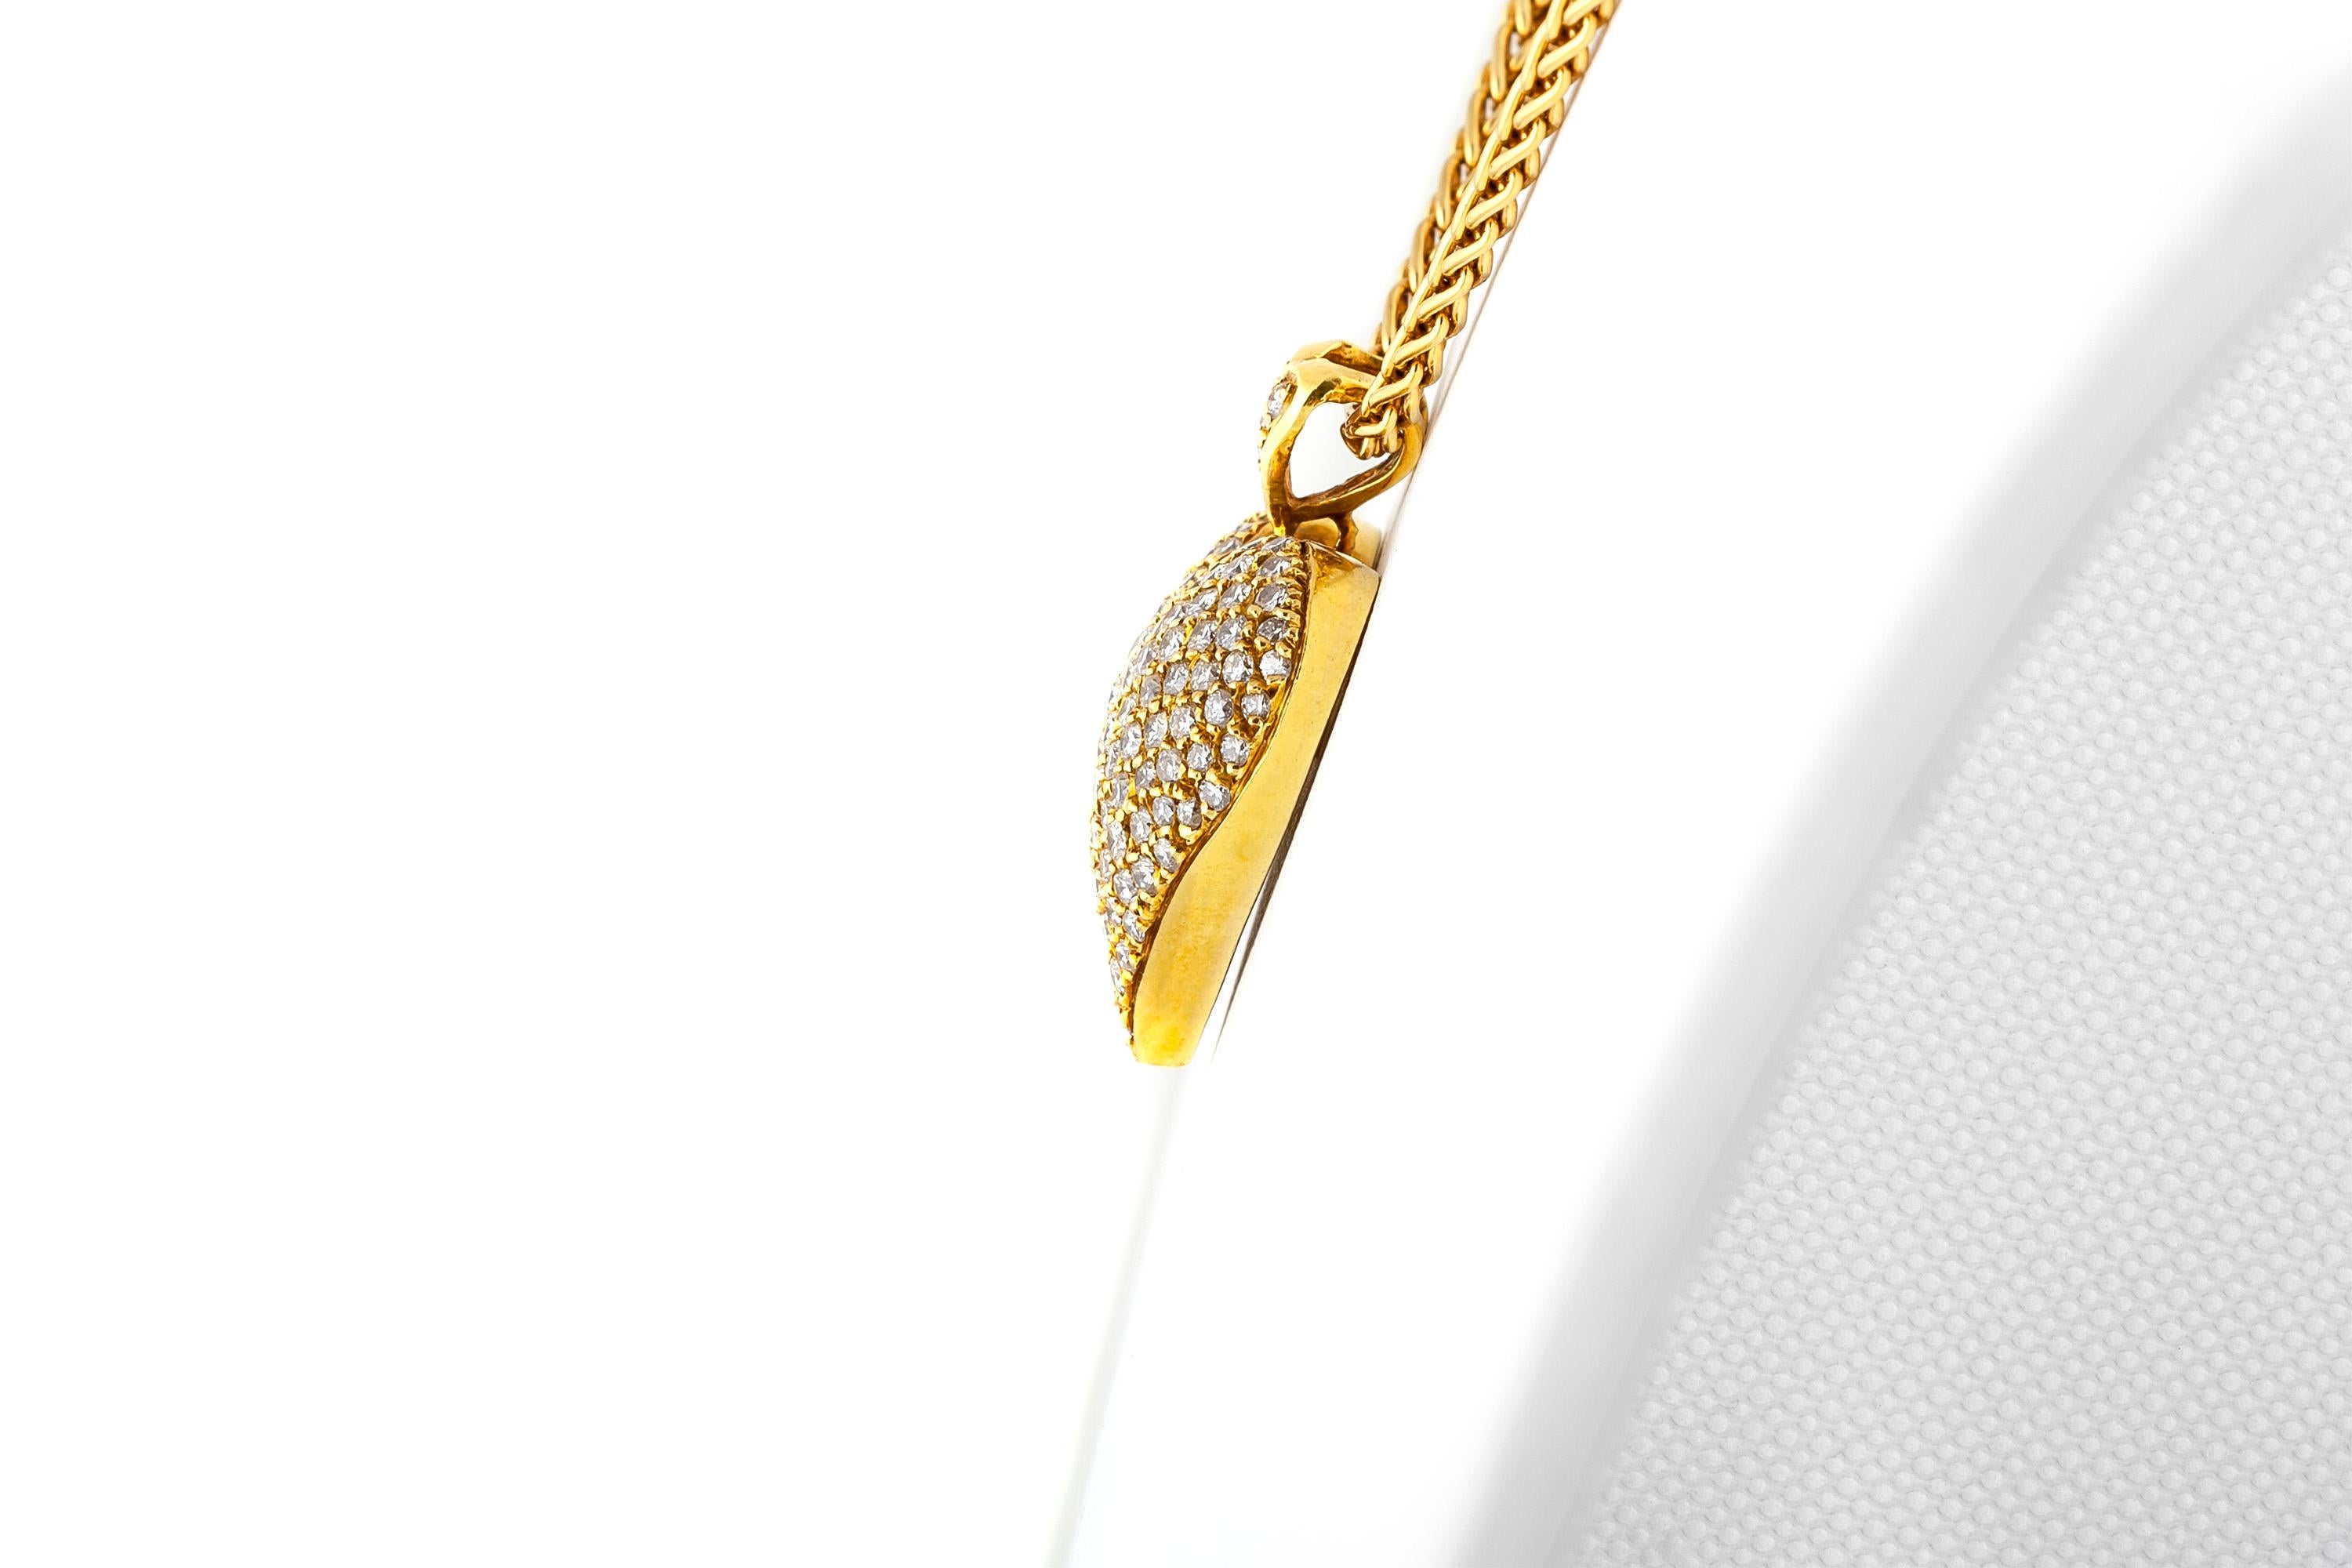 Finely crafted in 18k yellow gold with brilliant cut diamonds weighing a total of approximately 3.50 carats.